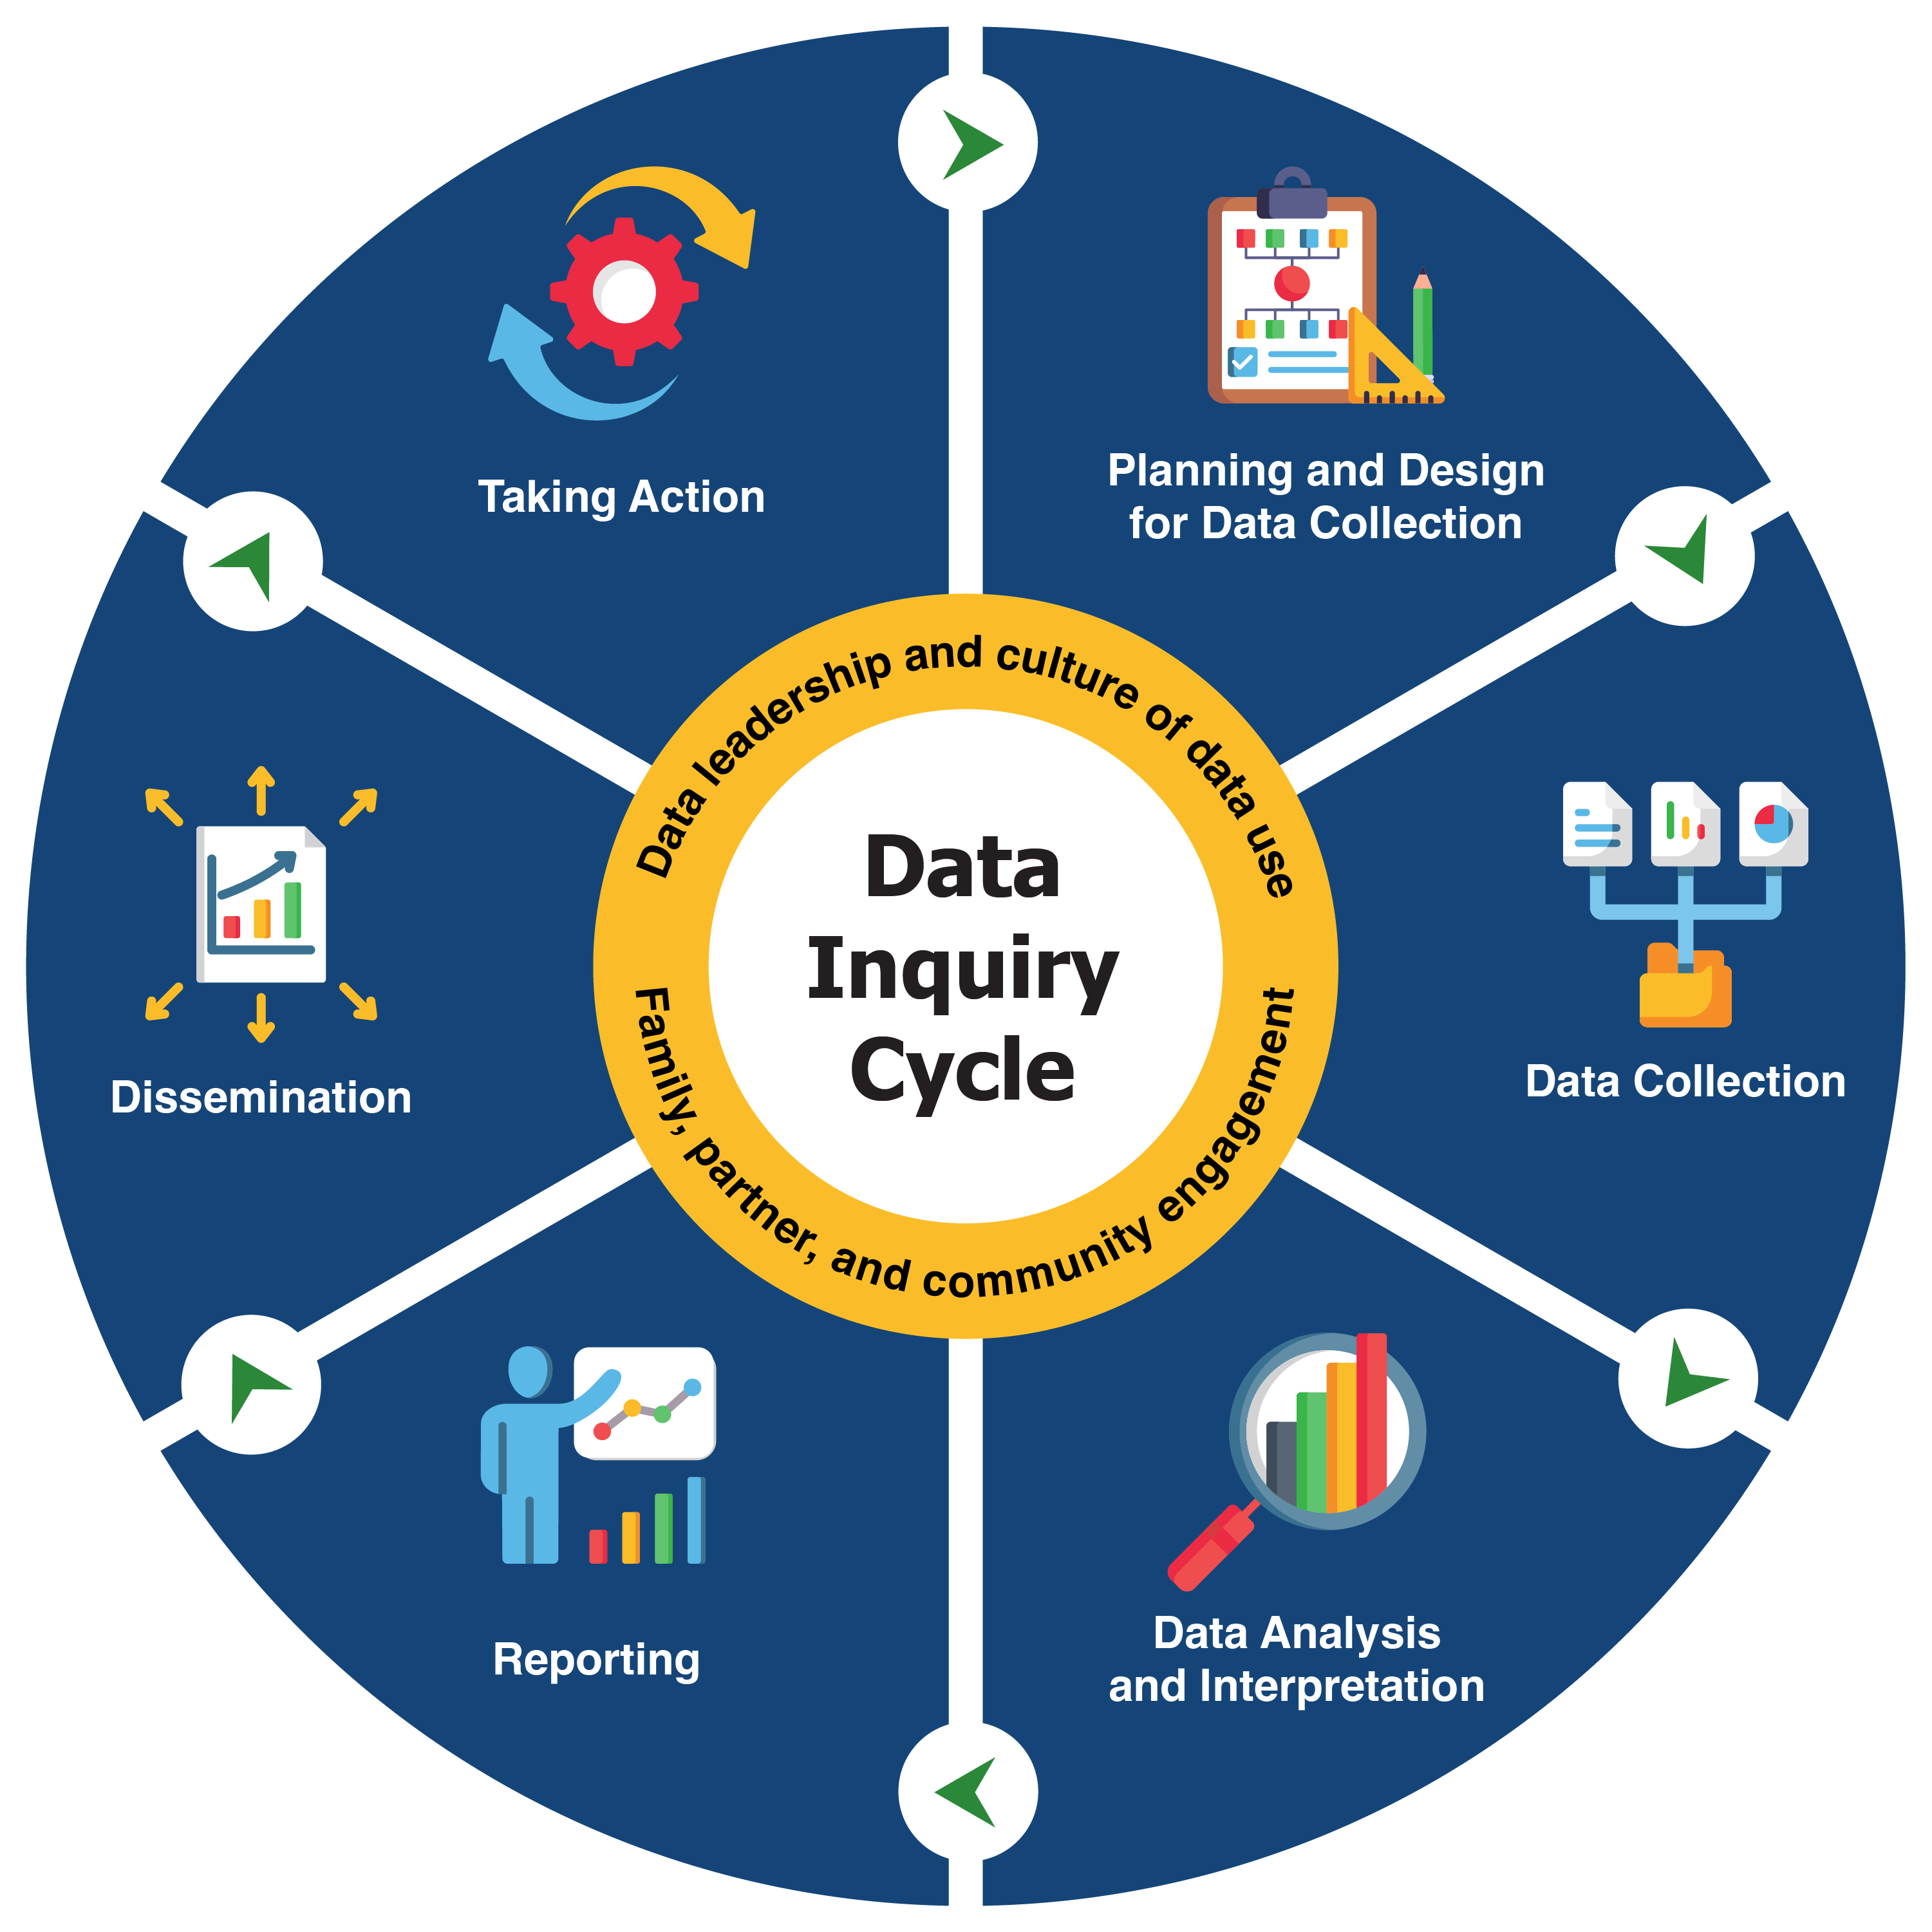 Data Inquiry Cycle graphic shows an iterative sequence of six stages: planning and design for data collection, data
collection, data analysis and interpretation, reporting, dissemination, and taking action